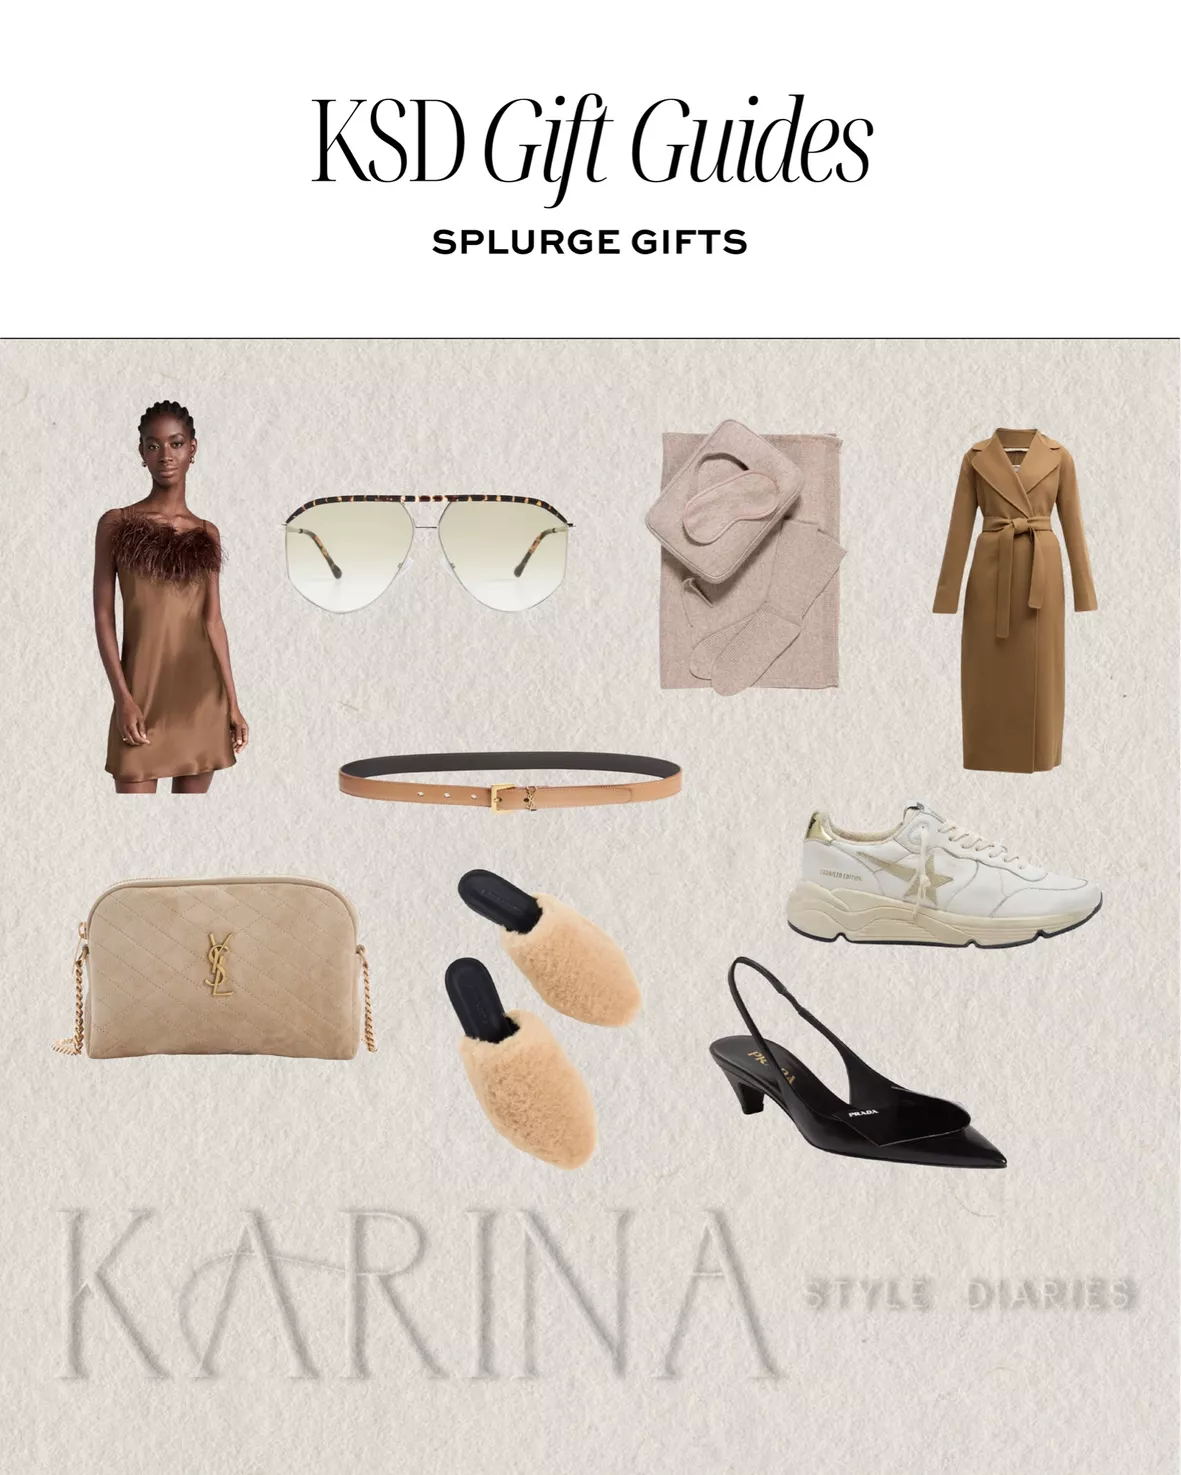 My Designer Handbag Collection - What's Worth and What's Not! - Karina  Style Diaries